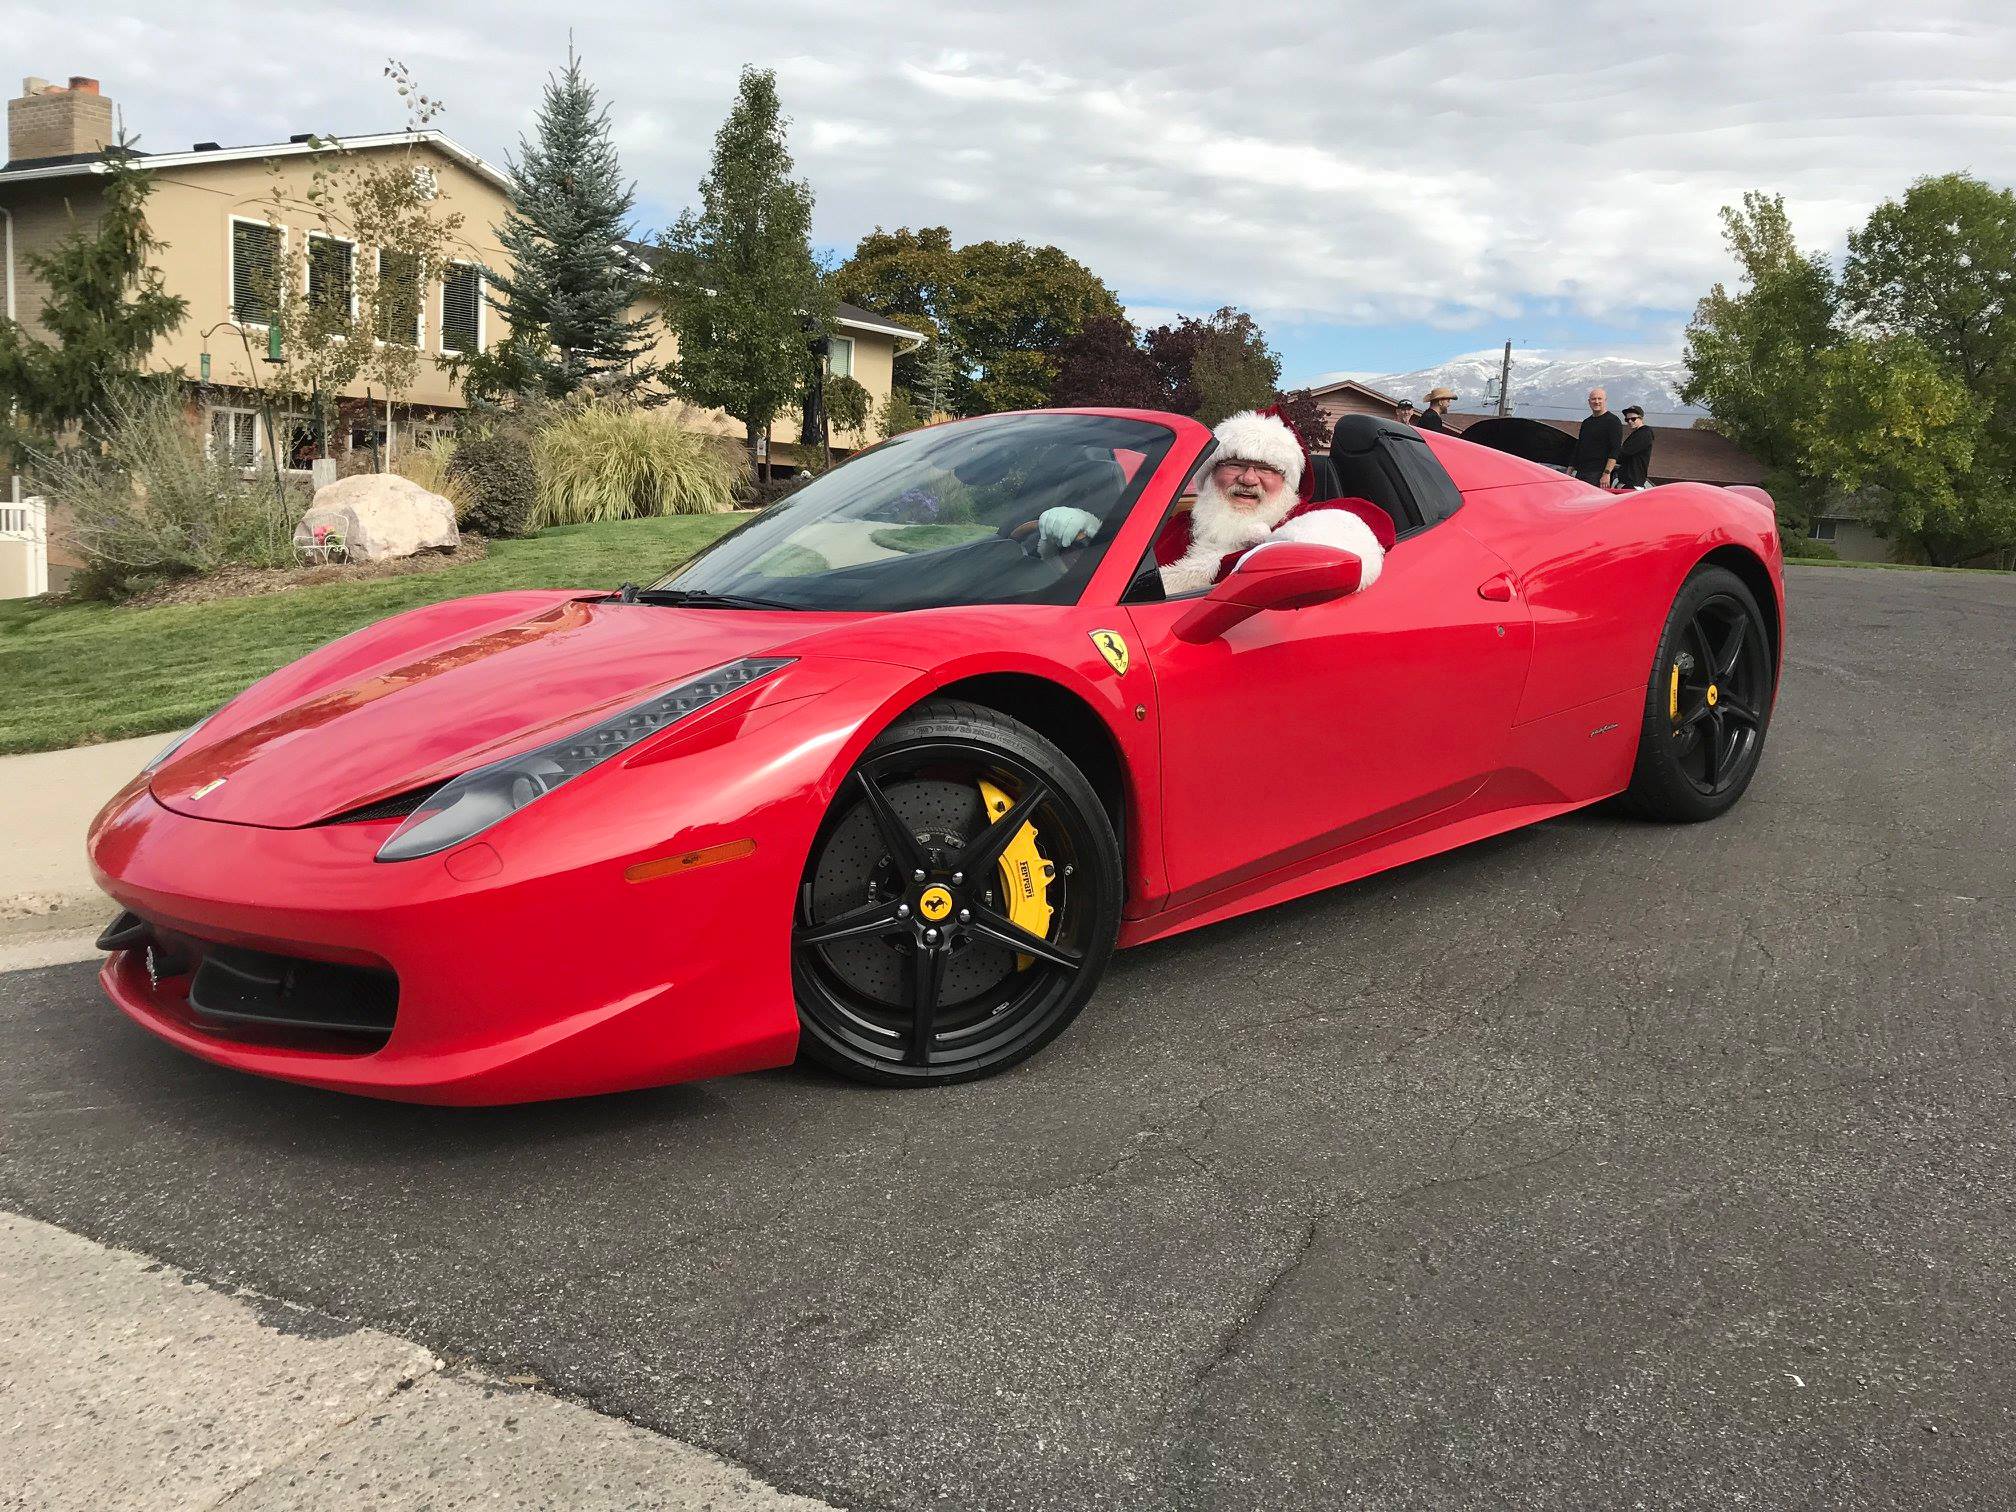 Supercar Owner Joins Santa to Raise Funds for Utah Foster Care